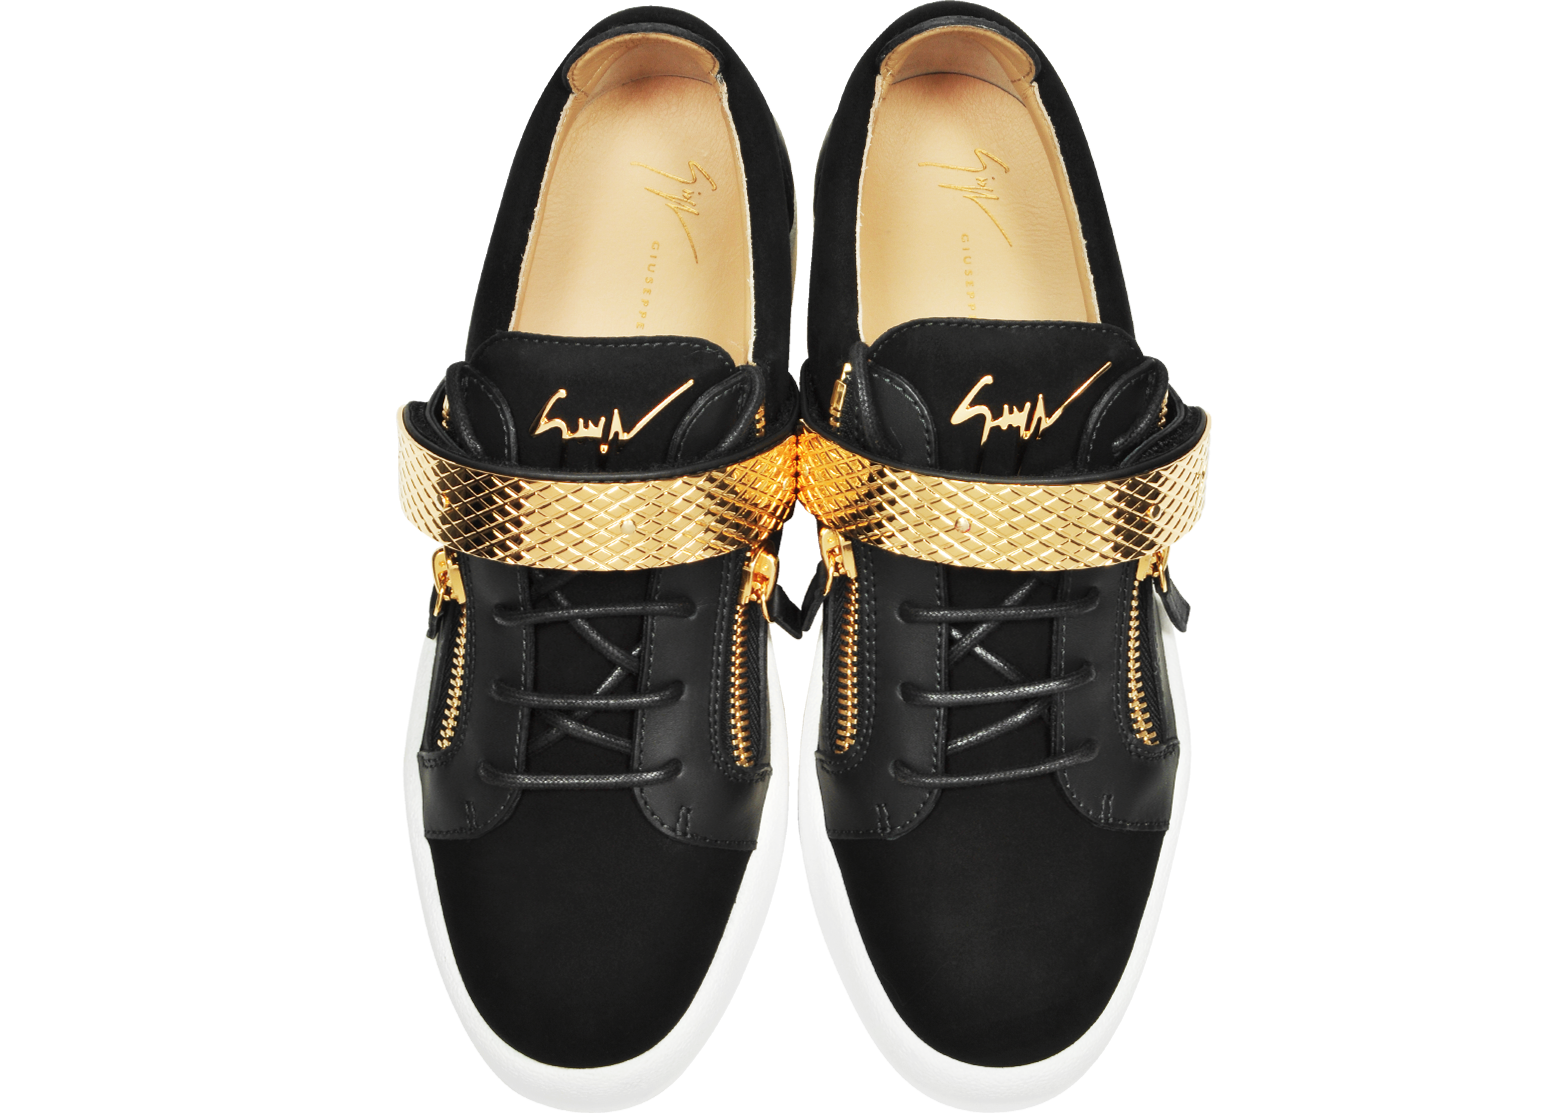 Giuseppe Zanotti Black Leather and Suede Archer Men's Sneakers 39 (6 US | 5  UK | 39 EU) at FORZIERI